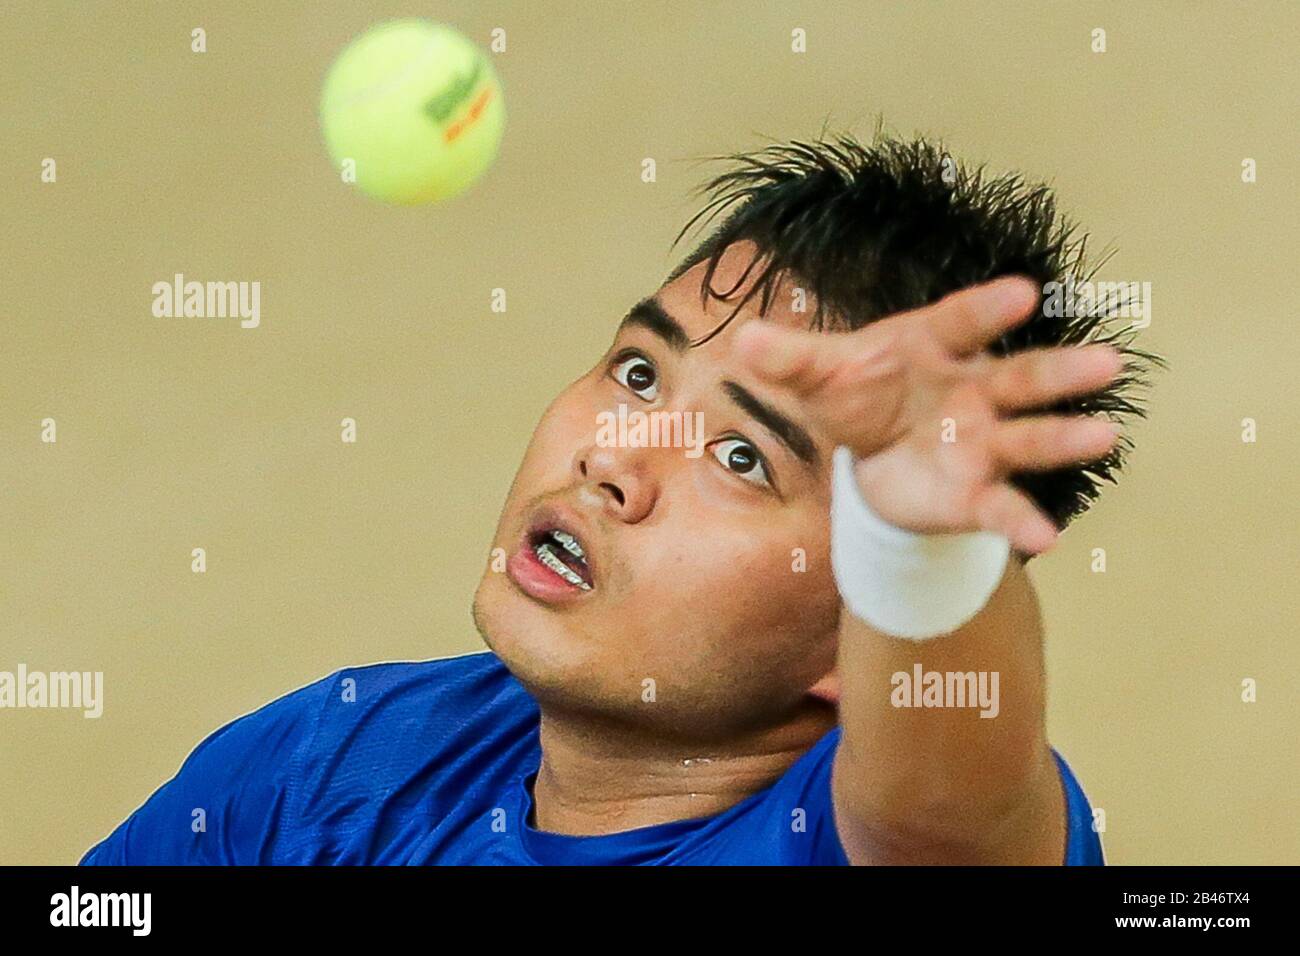 Manila. 6th Mar, 2020. Alberto Lim of the Philippines serves during the singles match against Stefanos Tsitsipas of Greece at Davis Cup World Group II play-off round between the Philippines and Greece in Manila, the Philippines on March 6, 2020. Credit: Rouelle Umali/Xinhua/Alamy Live News Stock Photo